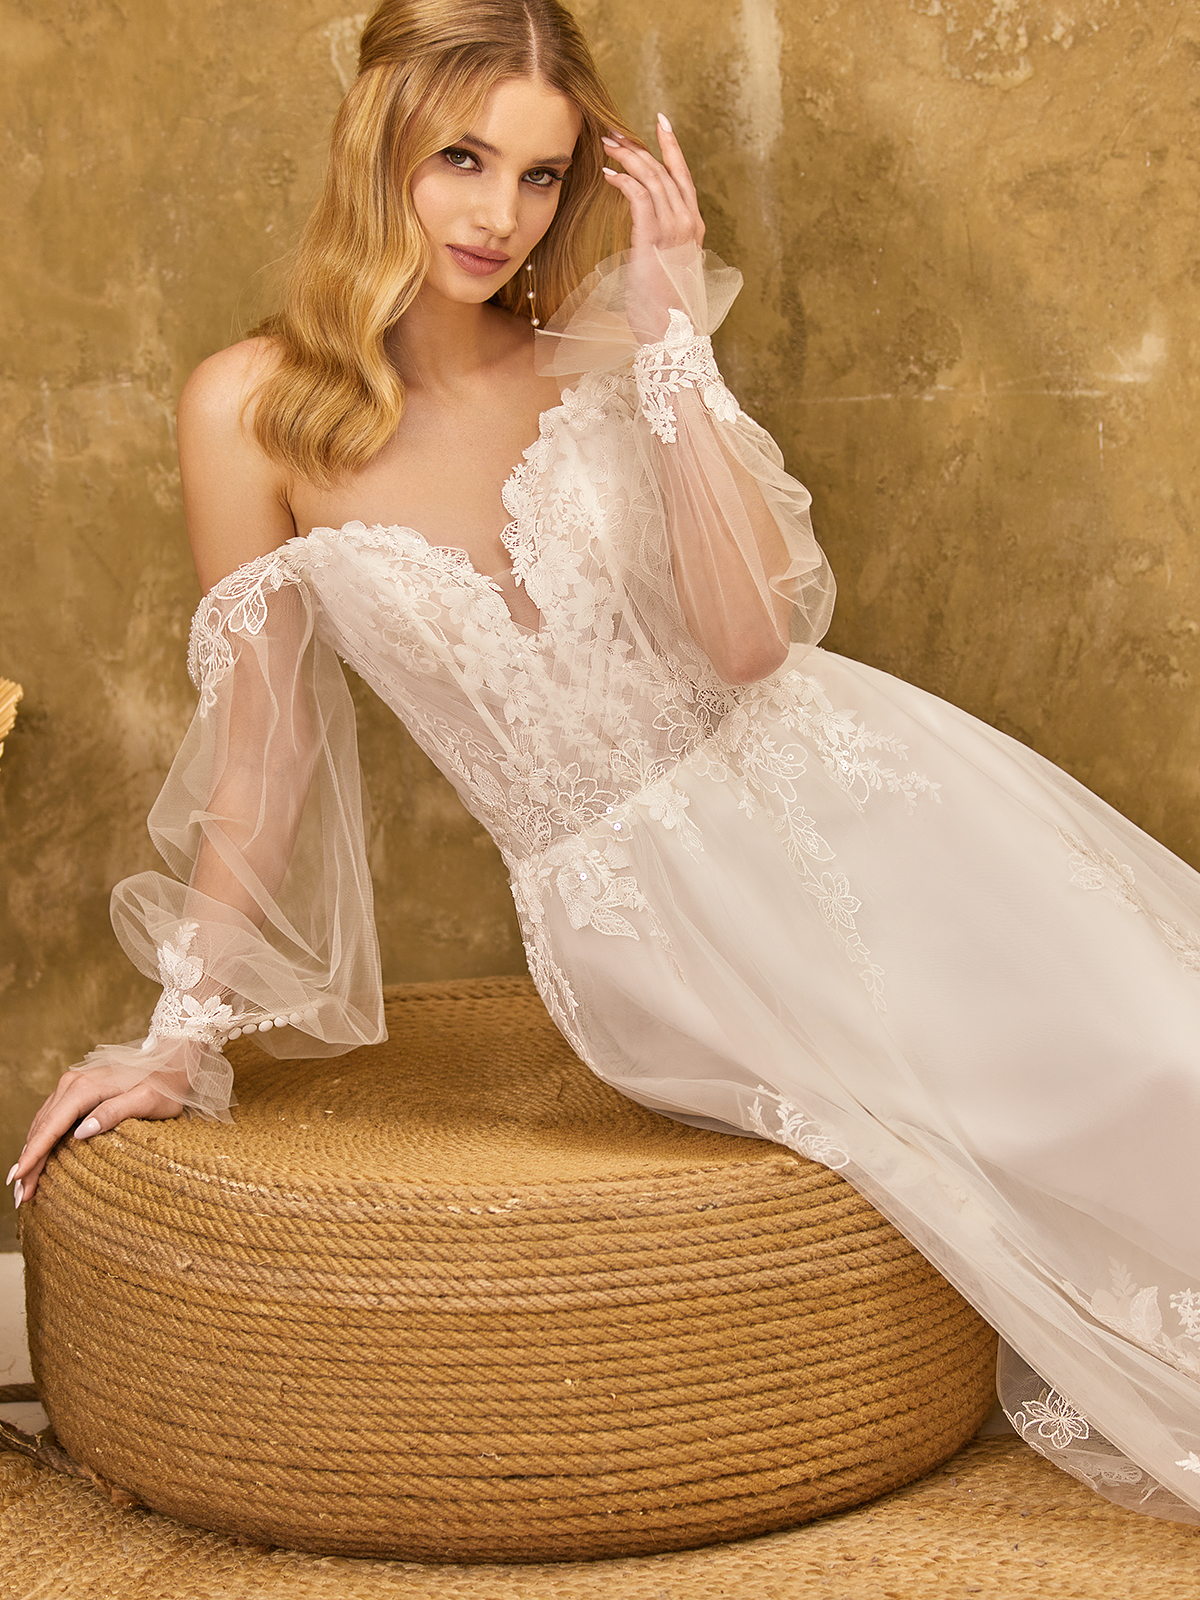 Tips for Styling a Lace Wedding Dress